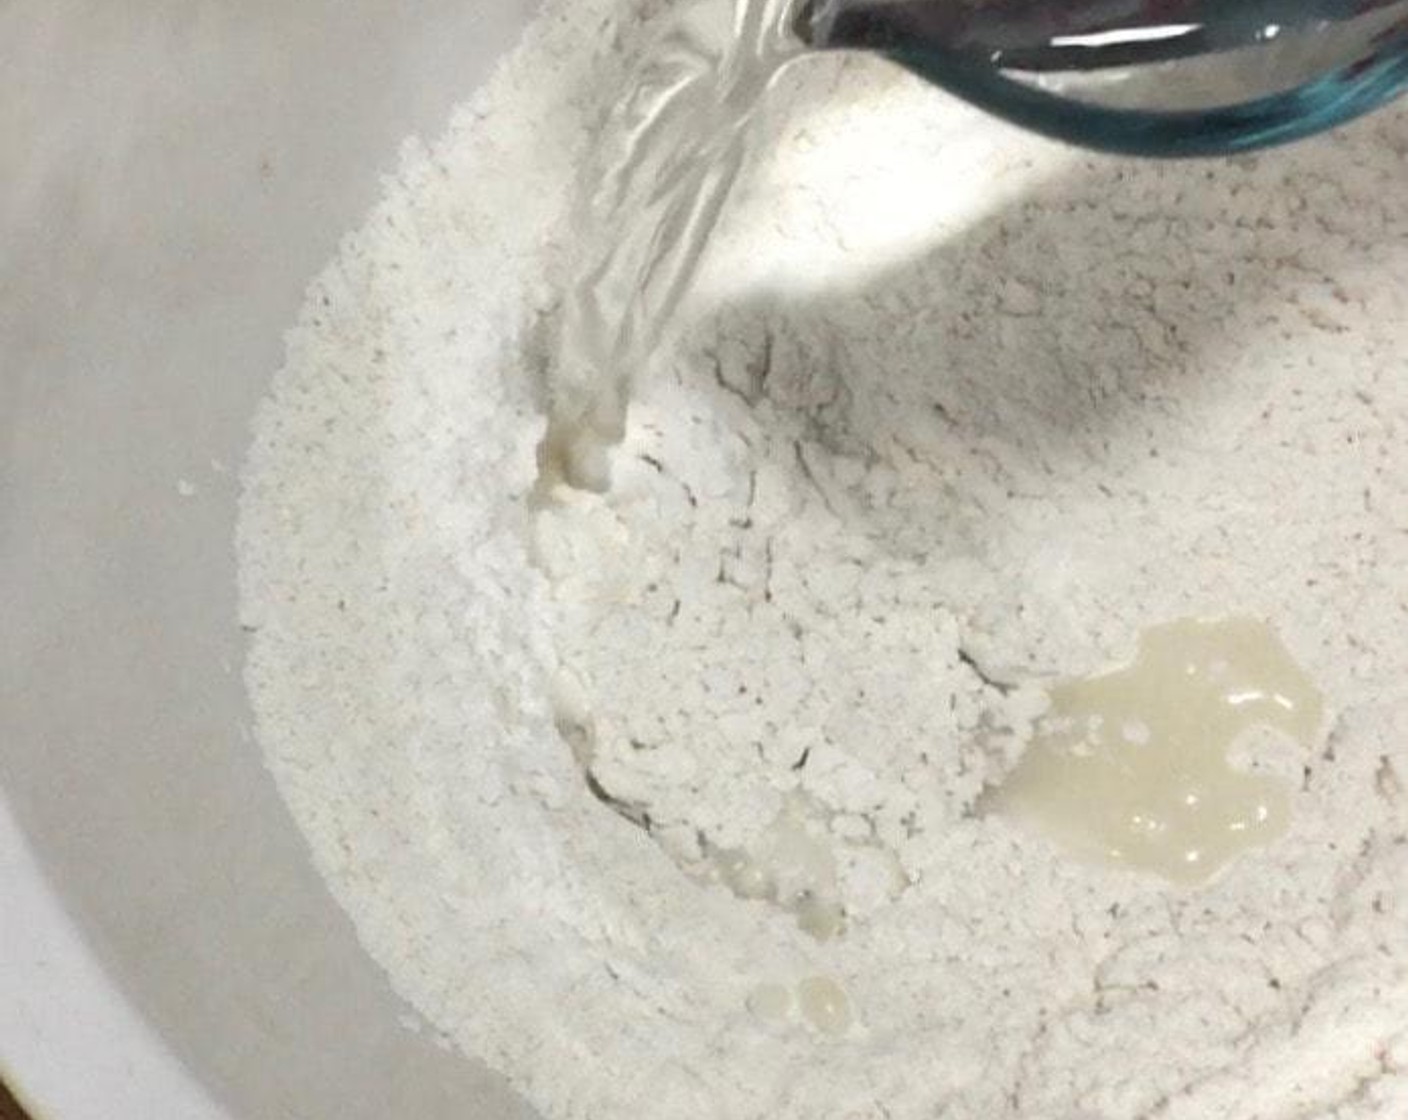 step 1 In a large mixing bowl, mix All-Purpose Flour (1 2/3 cups), Instant Dry Yeast (1 Tbsp) and Granulated Sugar (2/3 cup). Then, add in lukewarm Water (3/4 cup) and mix well.